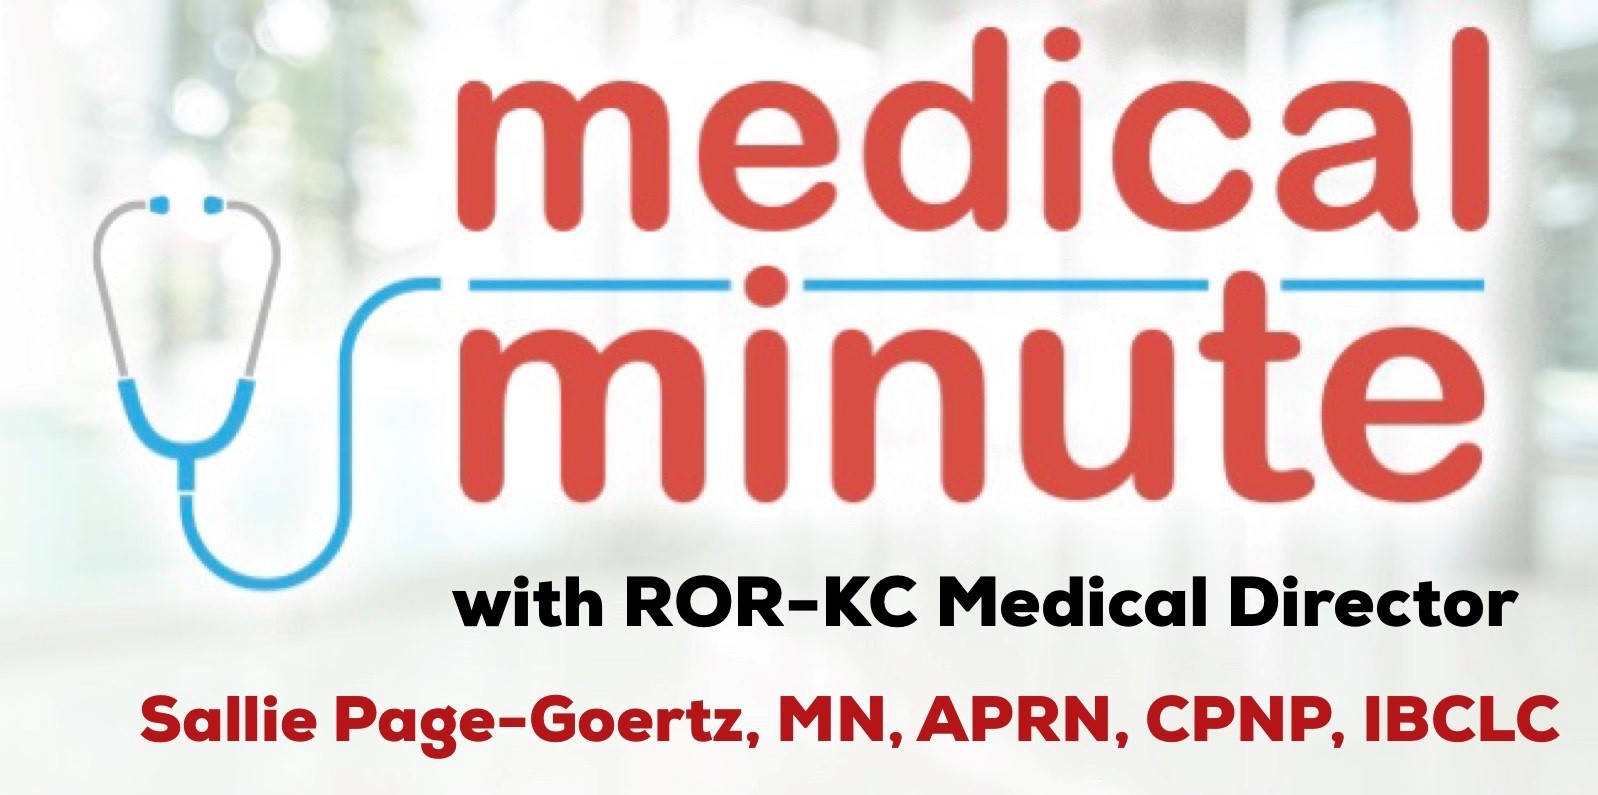 March Medical Minute